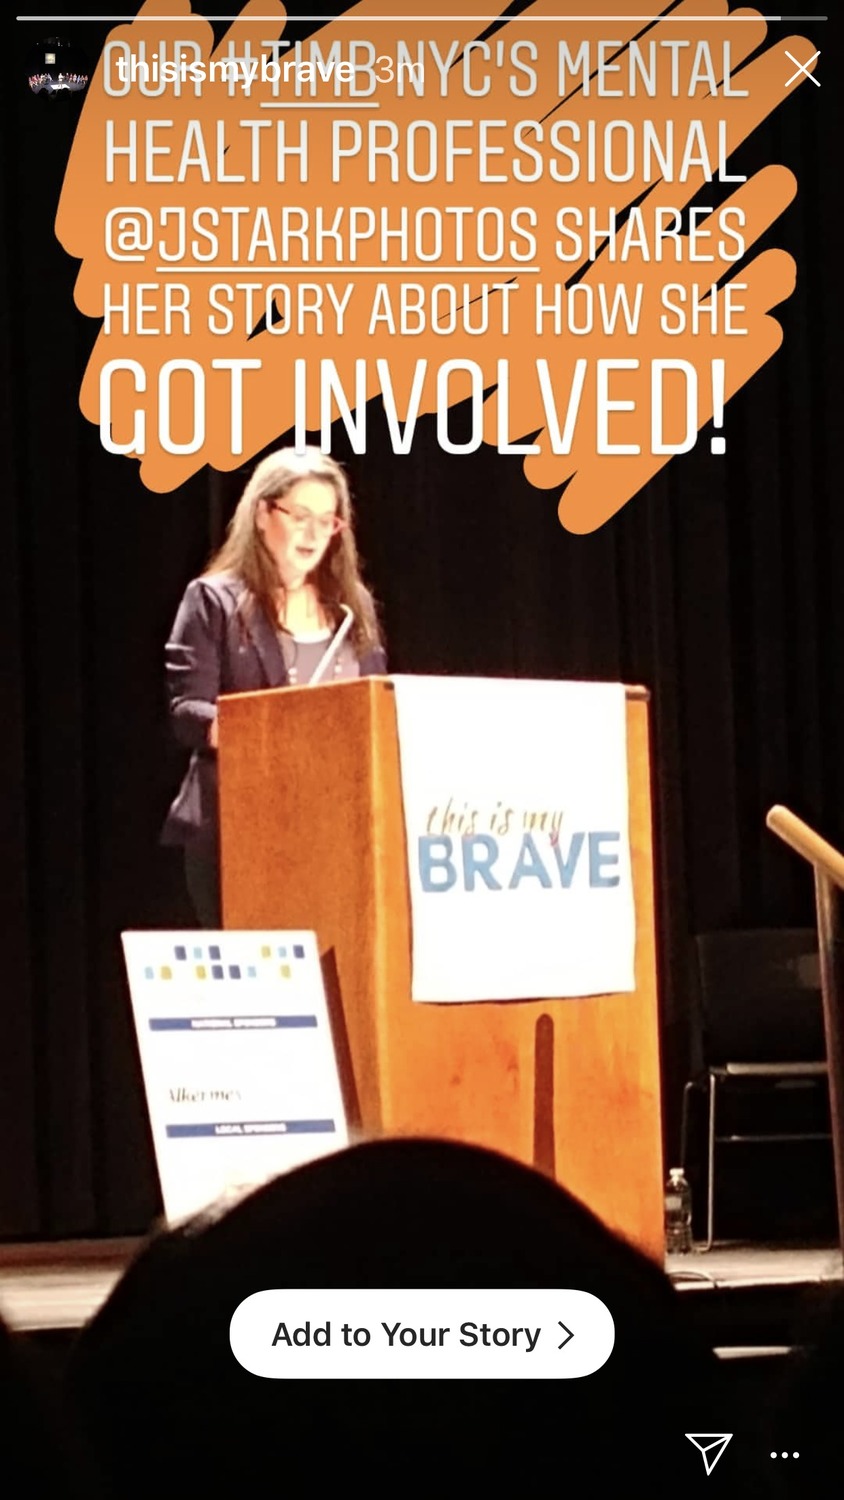 Gallery Photo of It was a tremendous honor to be asked to serve on the panel of 'thisismybrave.org' (Manhattan, NY) as their mental health professional.